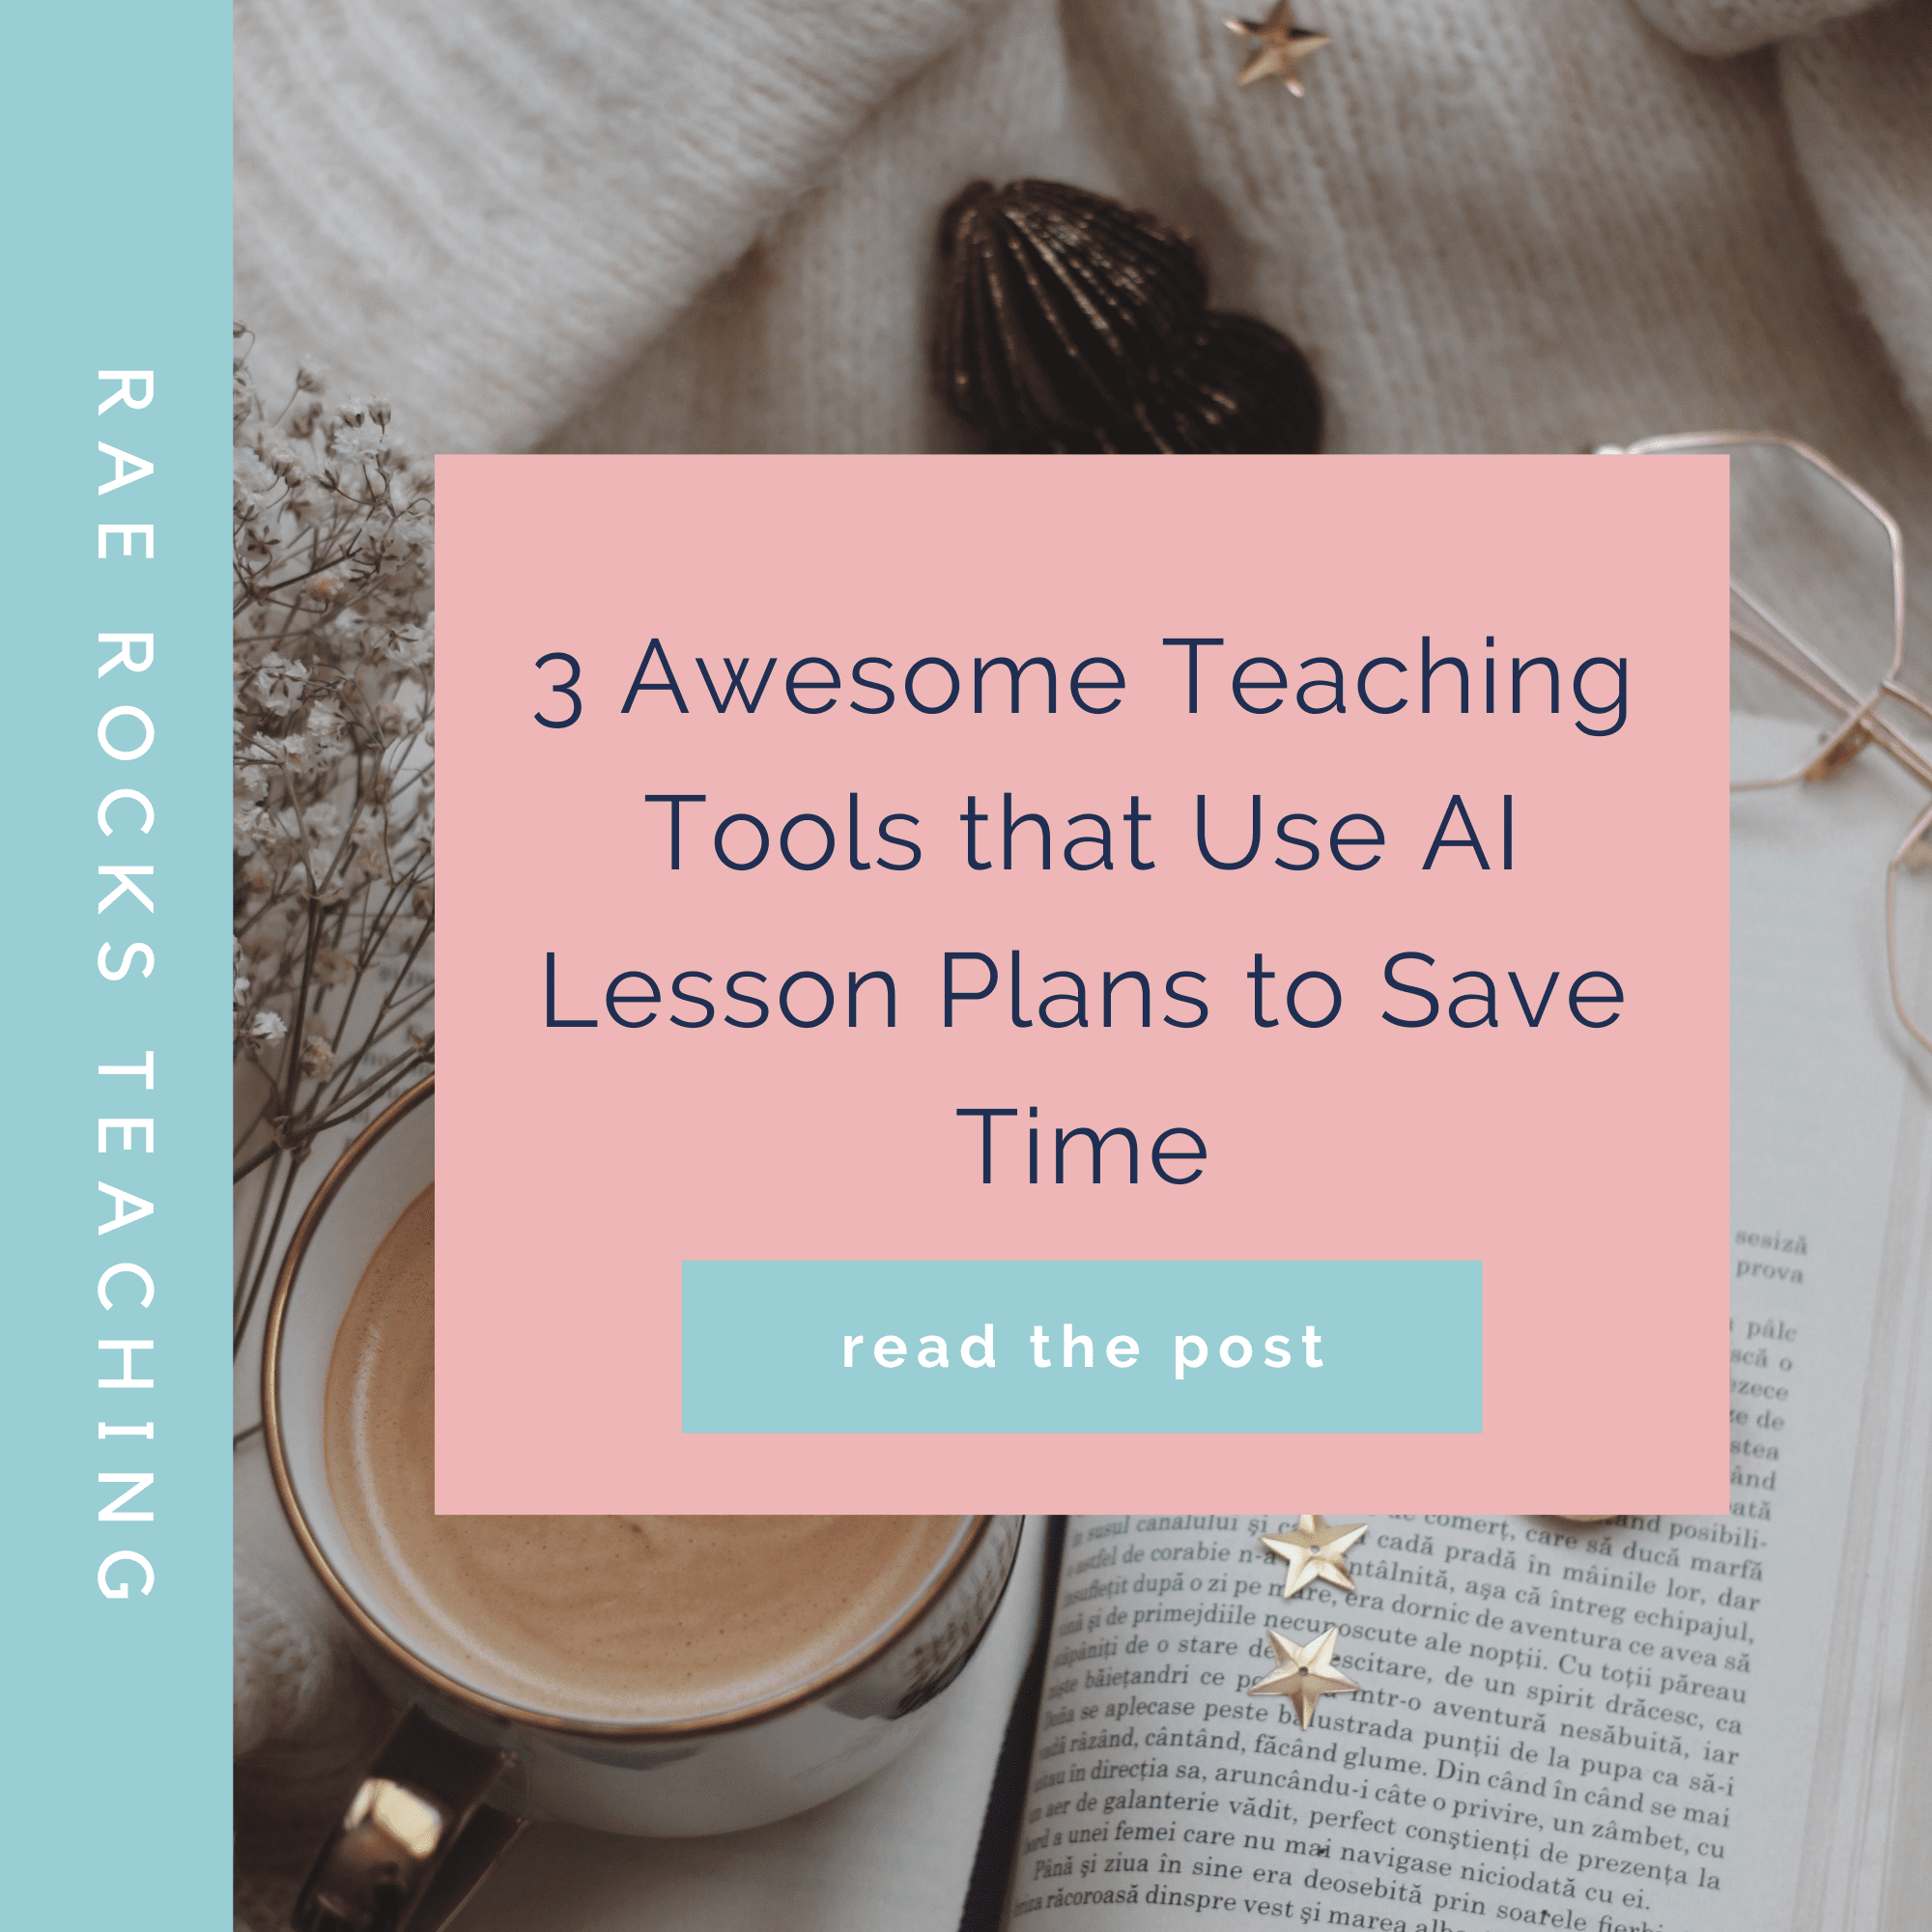 Plan lessons and kahoots to play in class with project tools